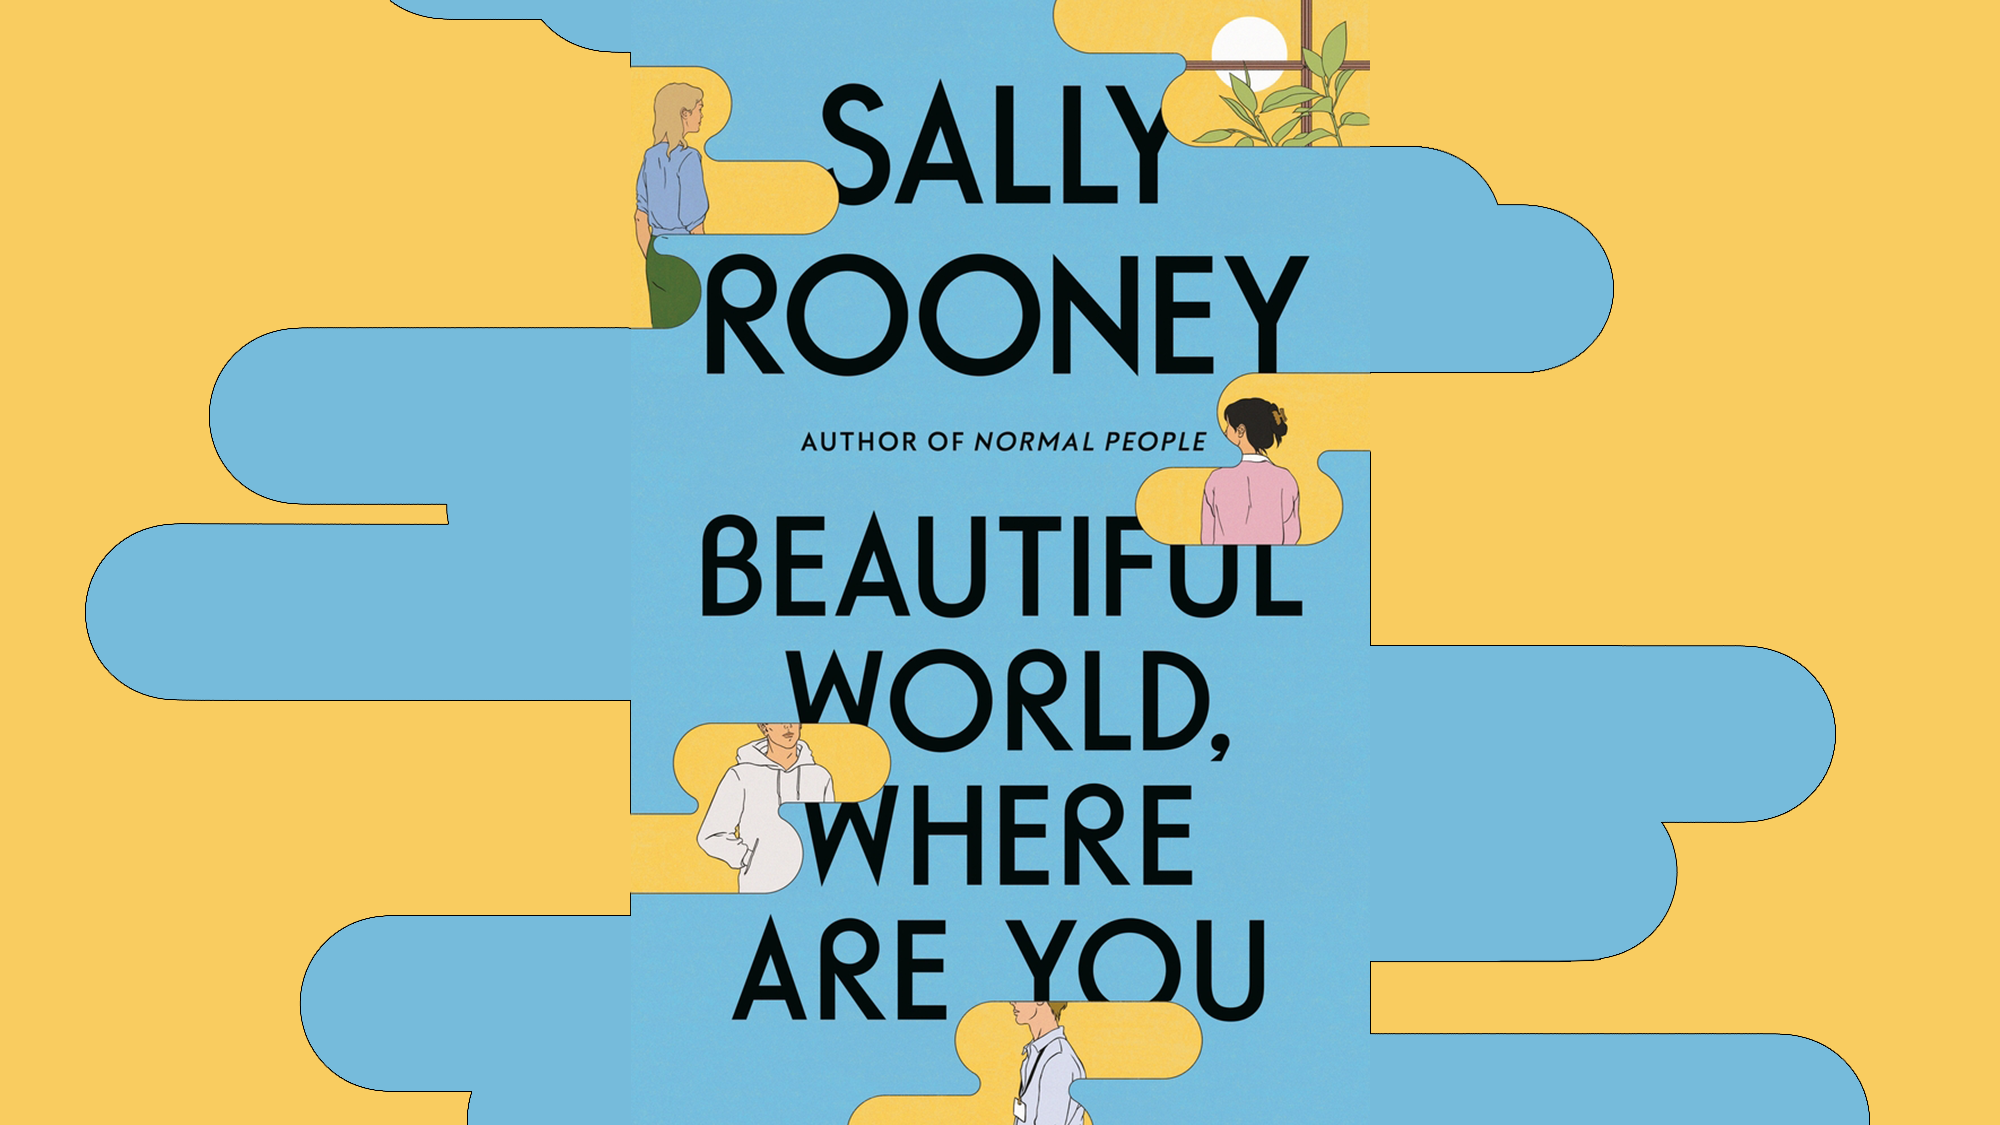 Beautiful World, Where Are You is Sally Rooney’s best novel yet